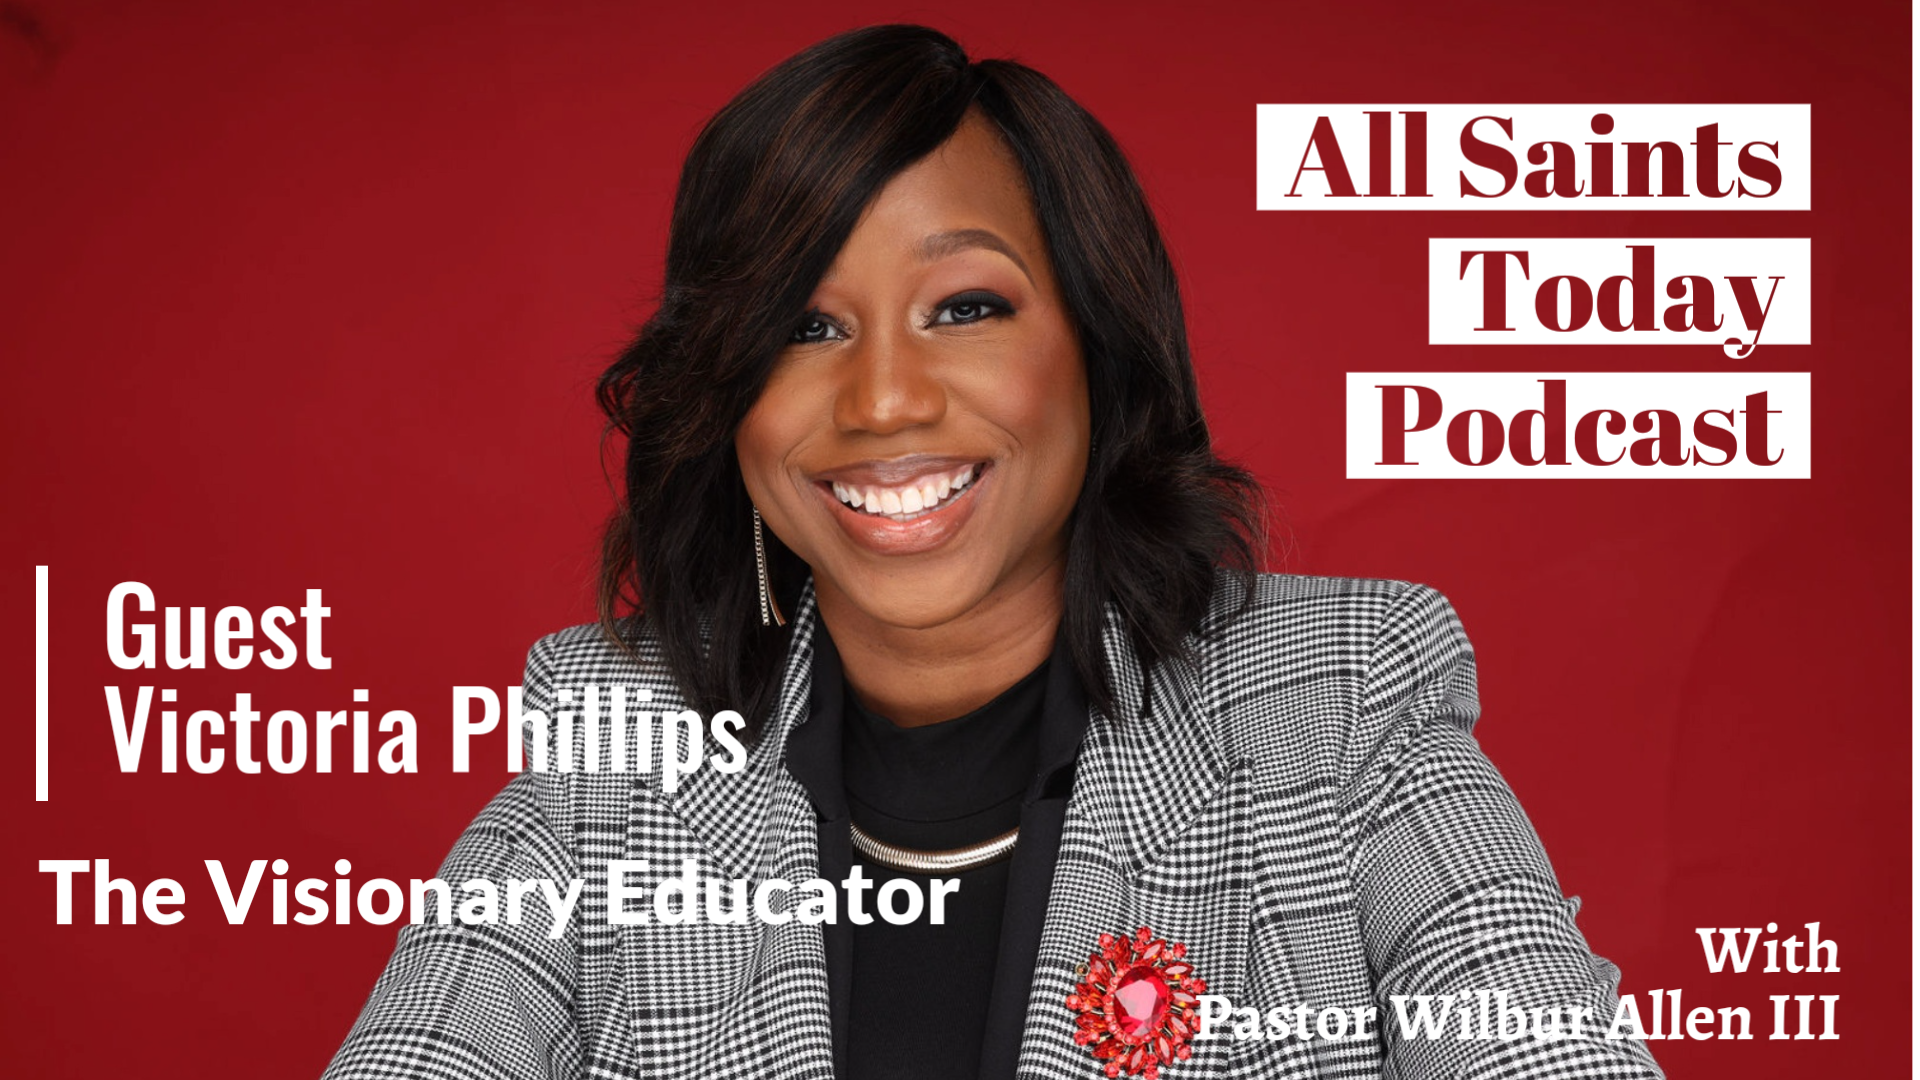 All Saints Today Podcast - The Visionary Educator